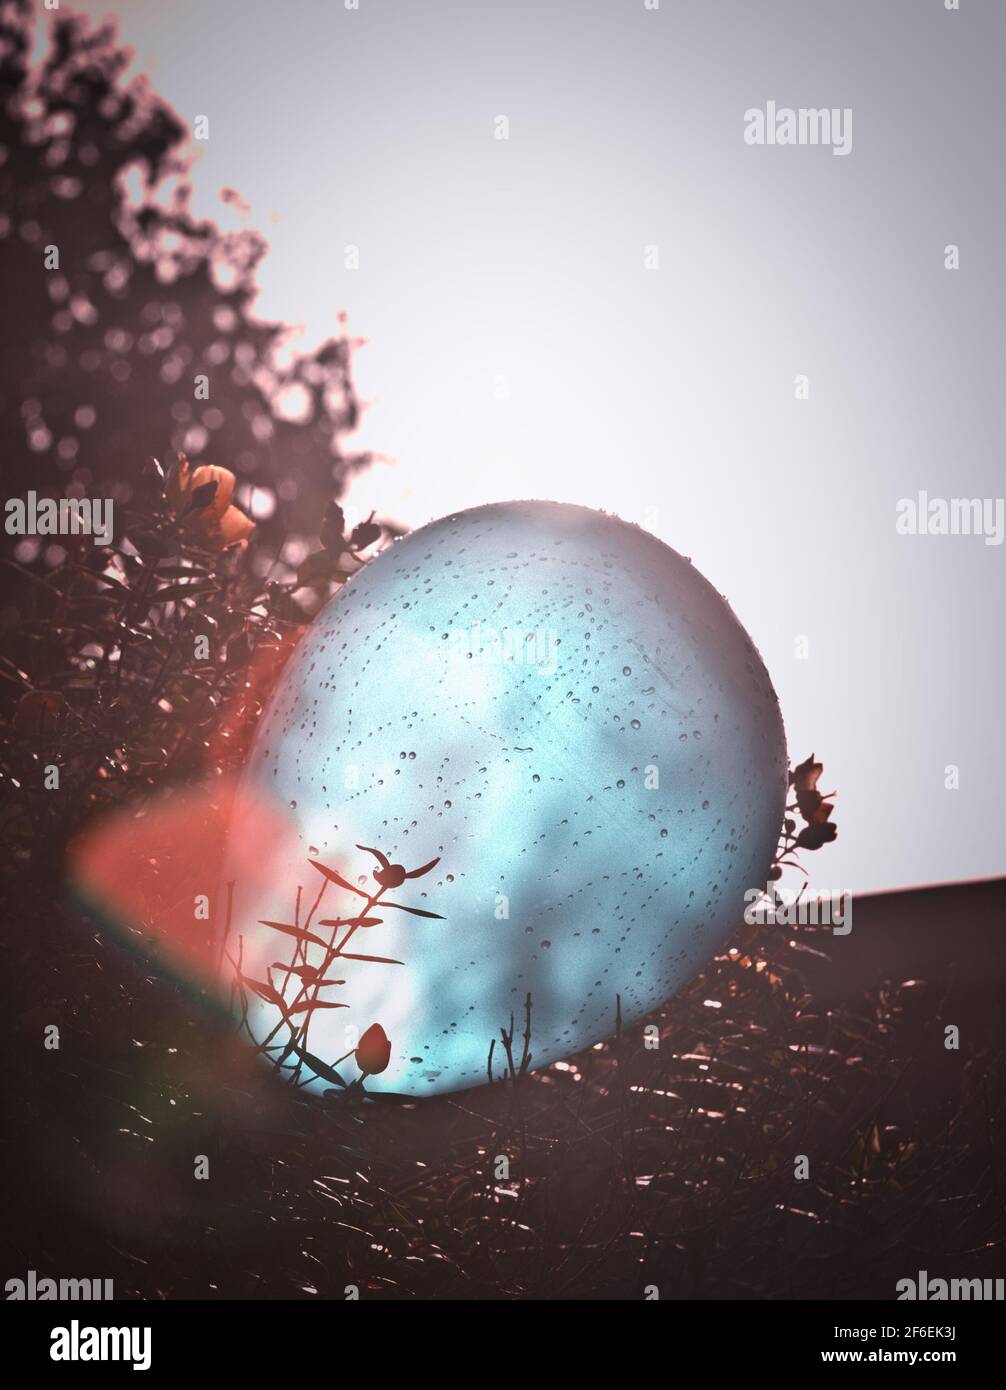 Blue balloon covered in raindrops on bush in sunlight. Concept of fragility Stock Photo